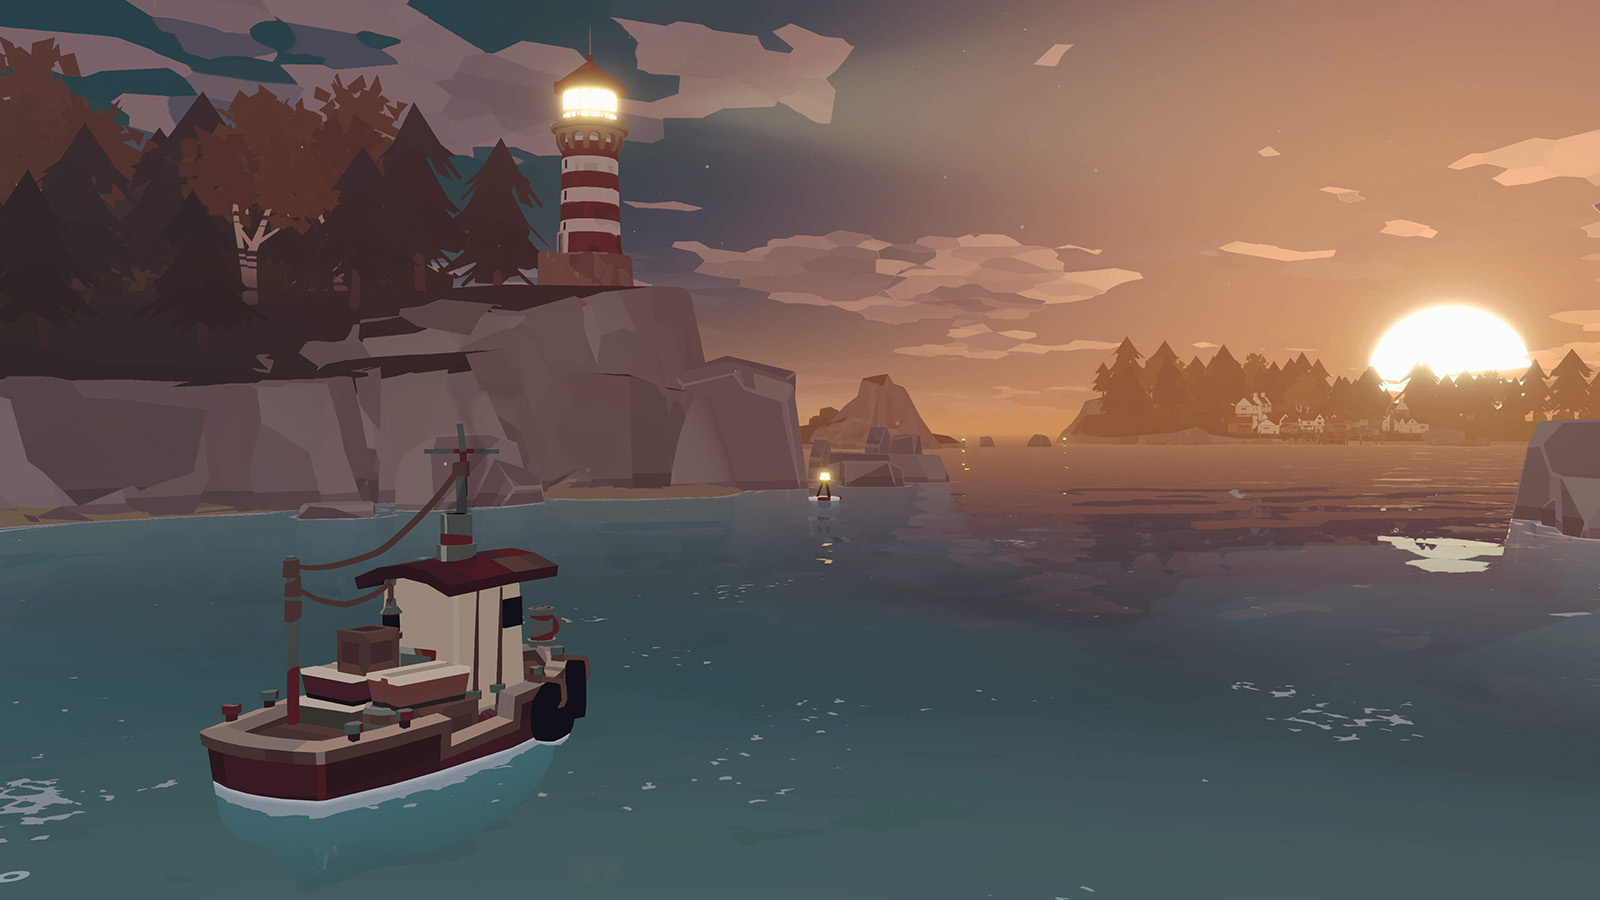 Lovecraftian Fishing Game Dredge Launches In March For PC And Consoles